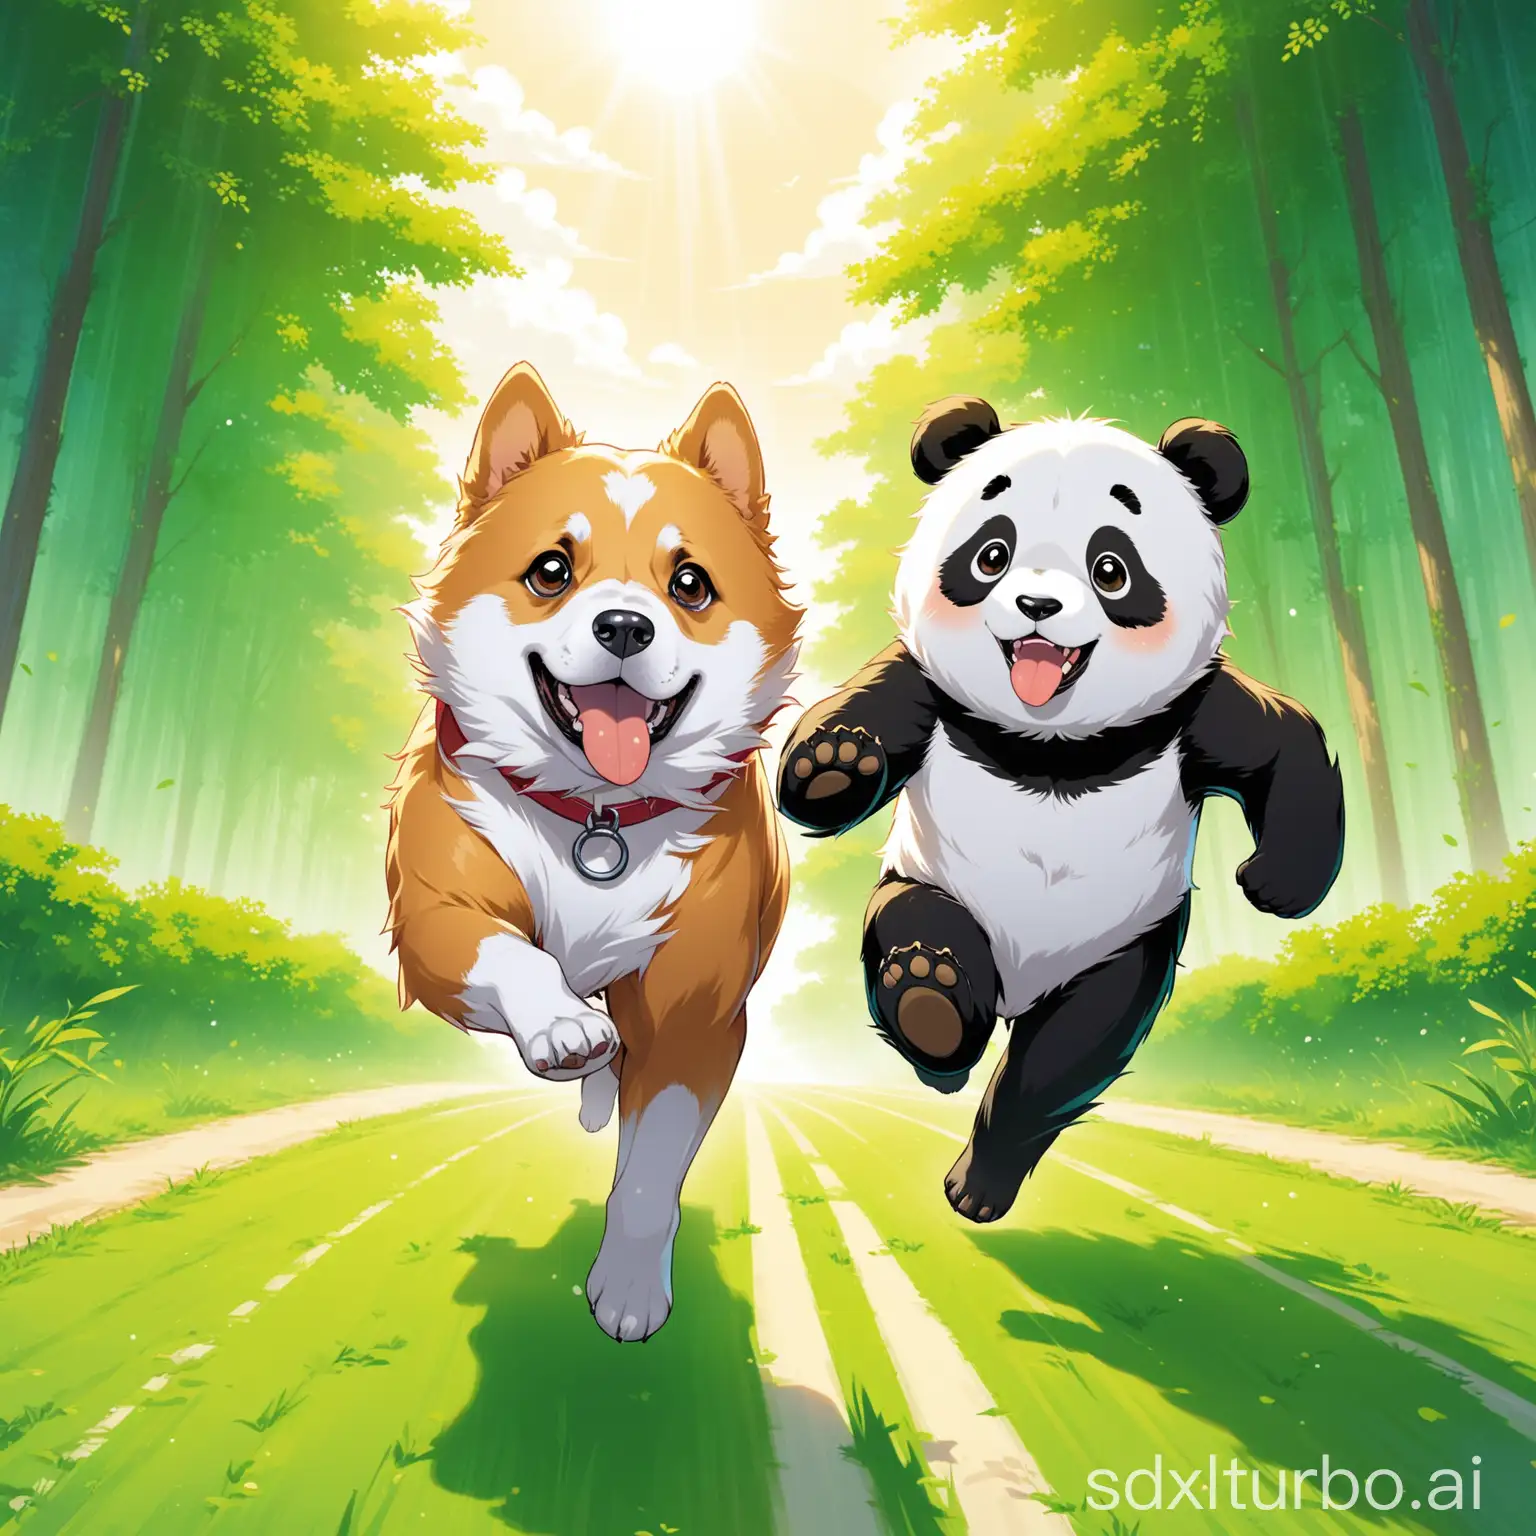 A dog and a panda  come running